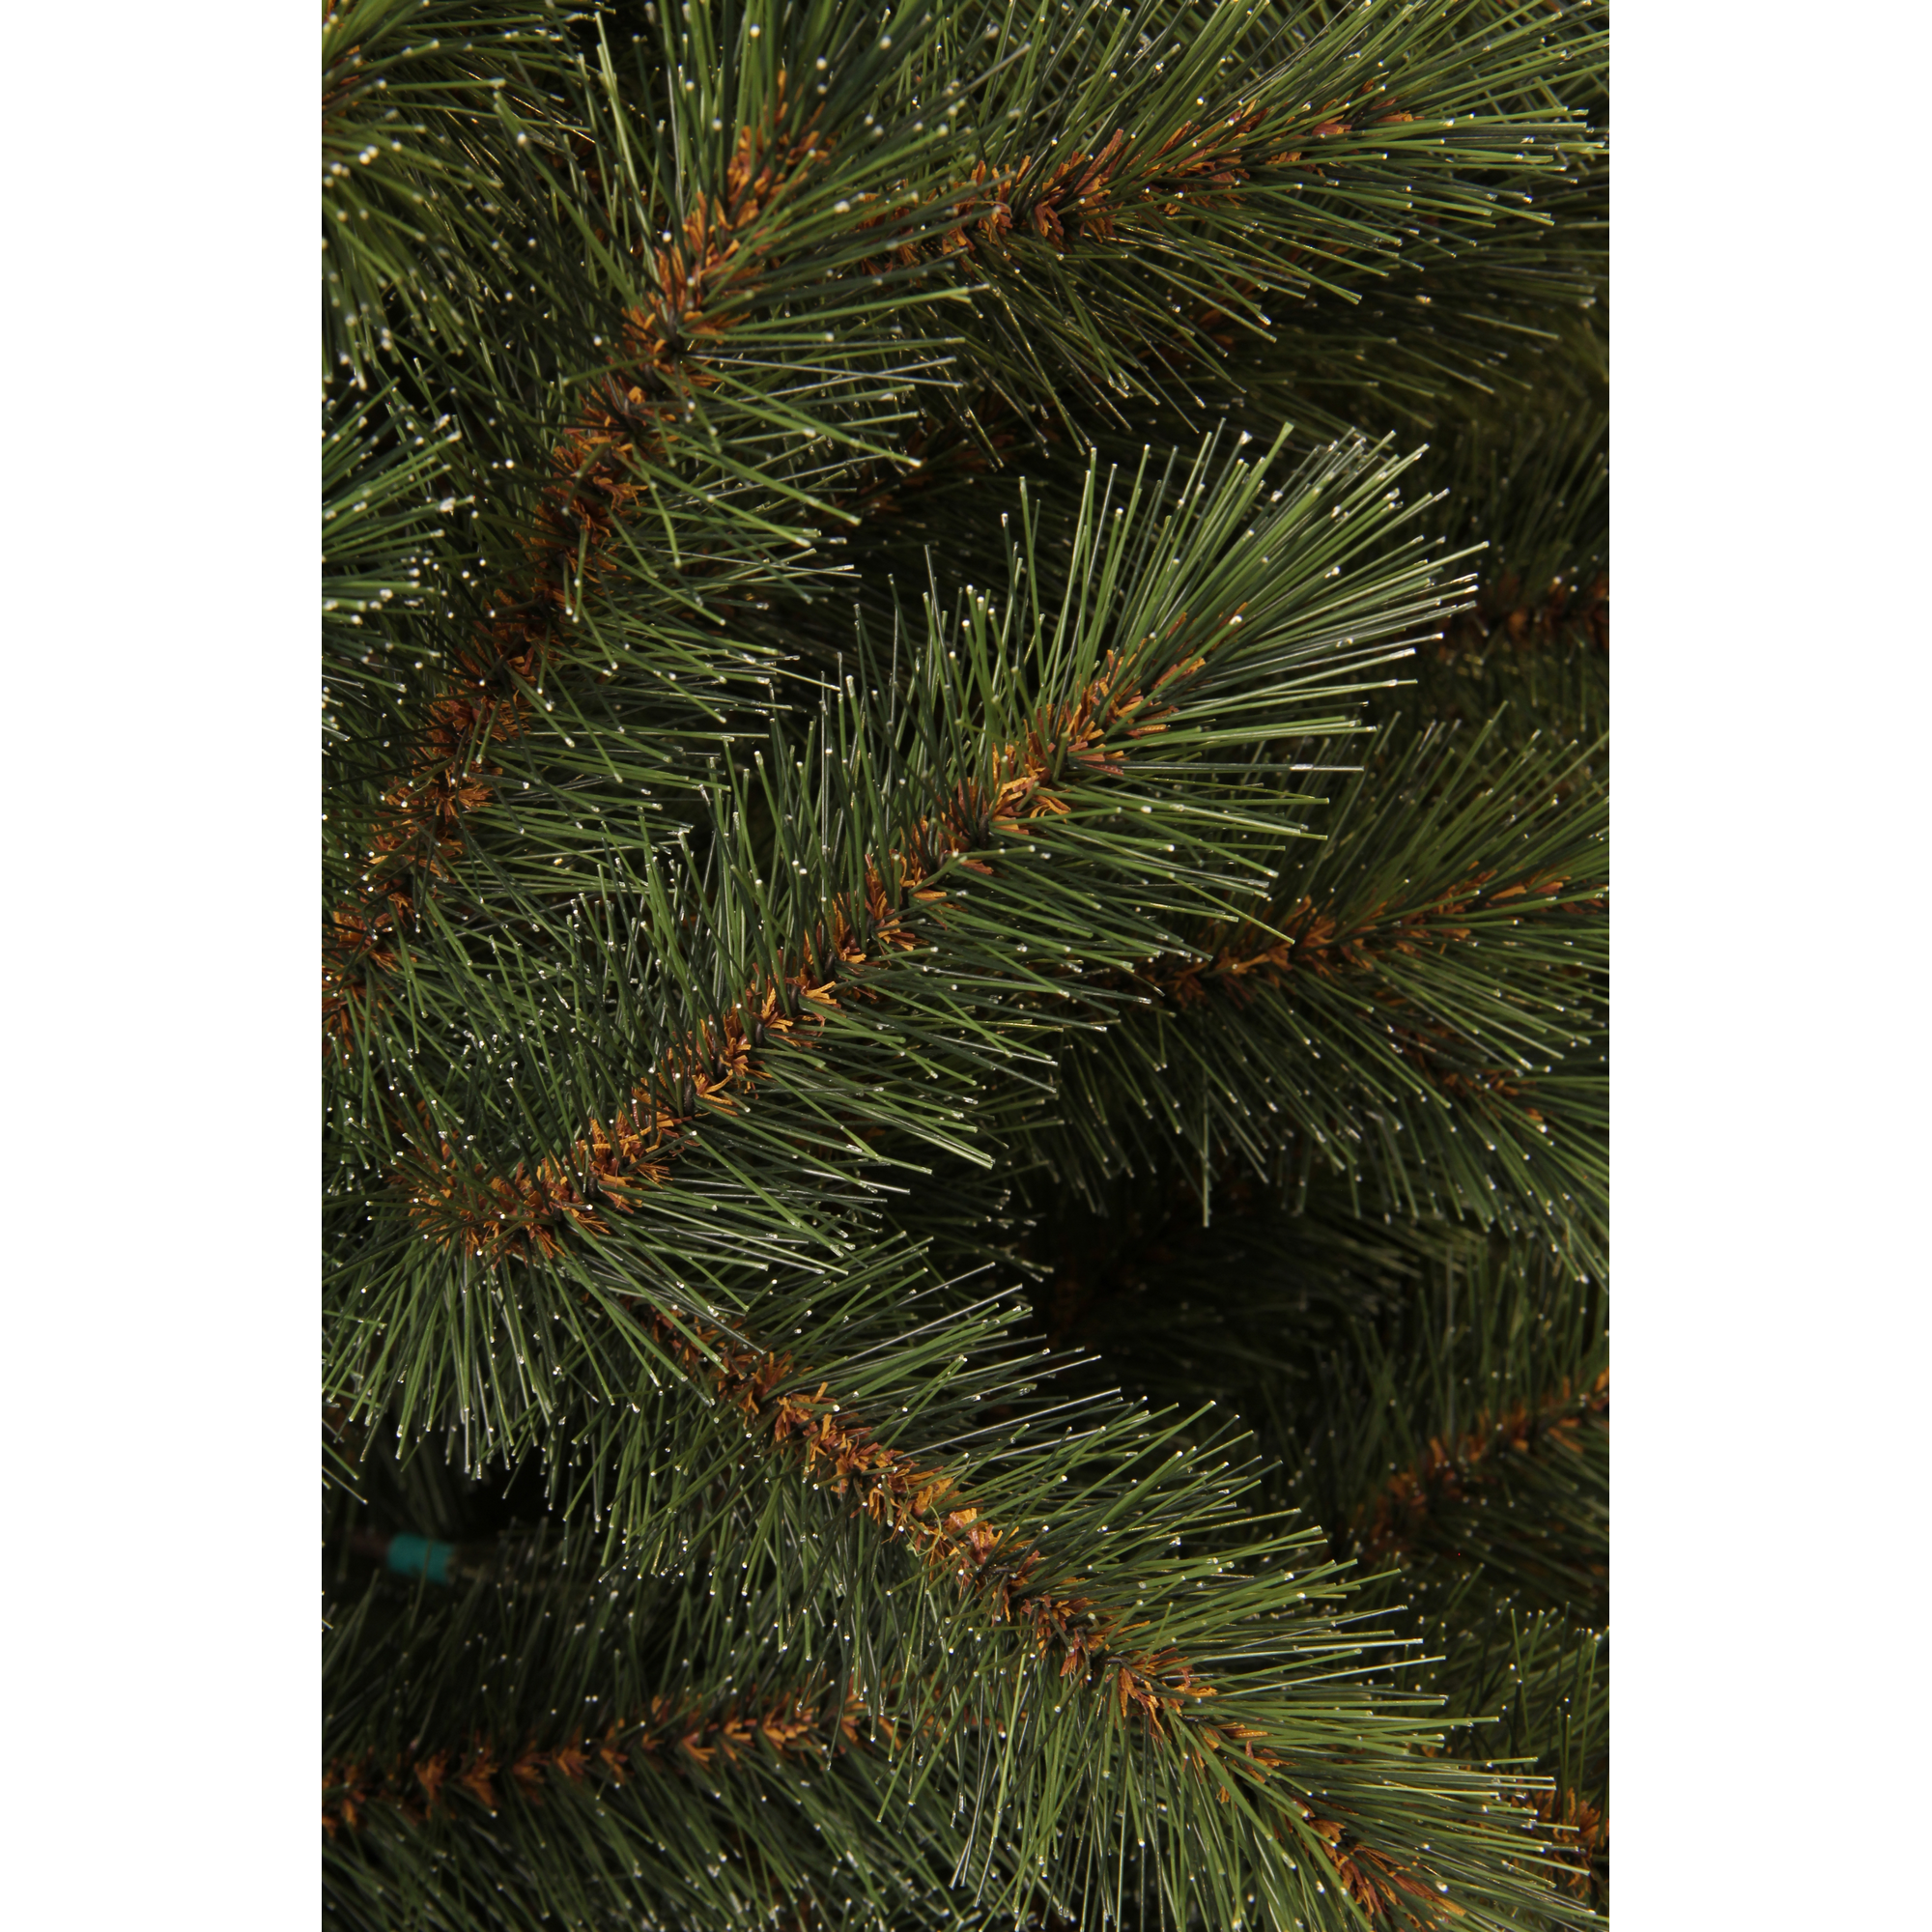 Weihnachtsbaum 'Toronto' deluxe green 155 cm + product picture